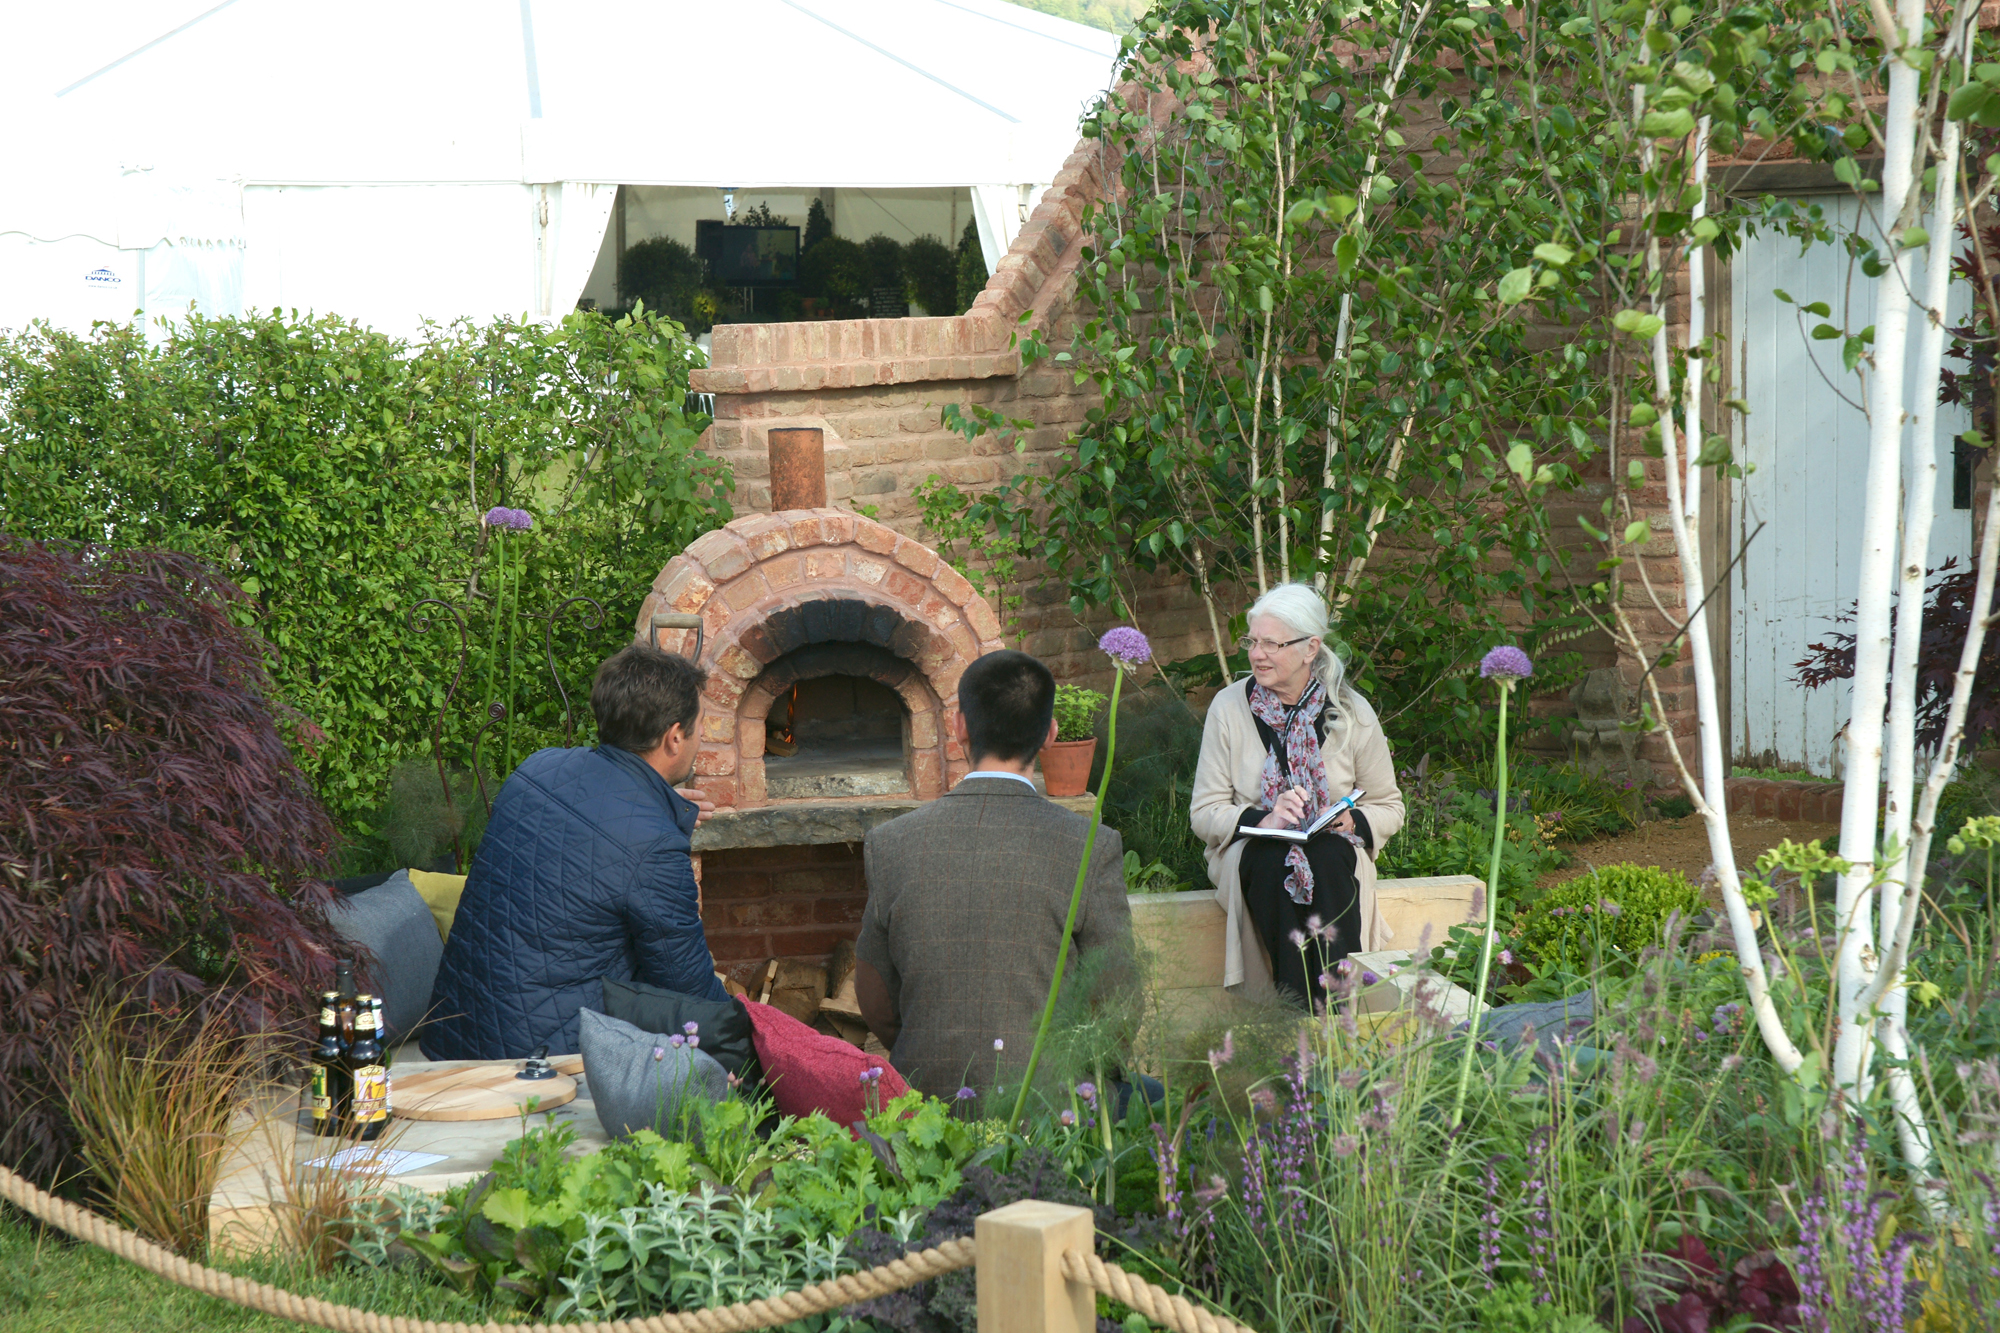 Think outside the box when it comes to creating a decorative and productive garden